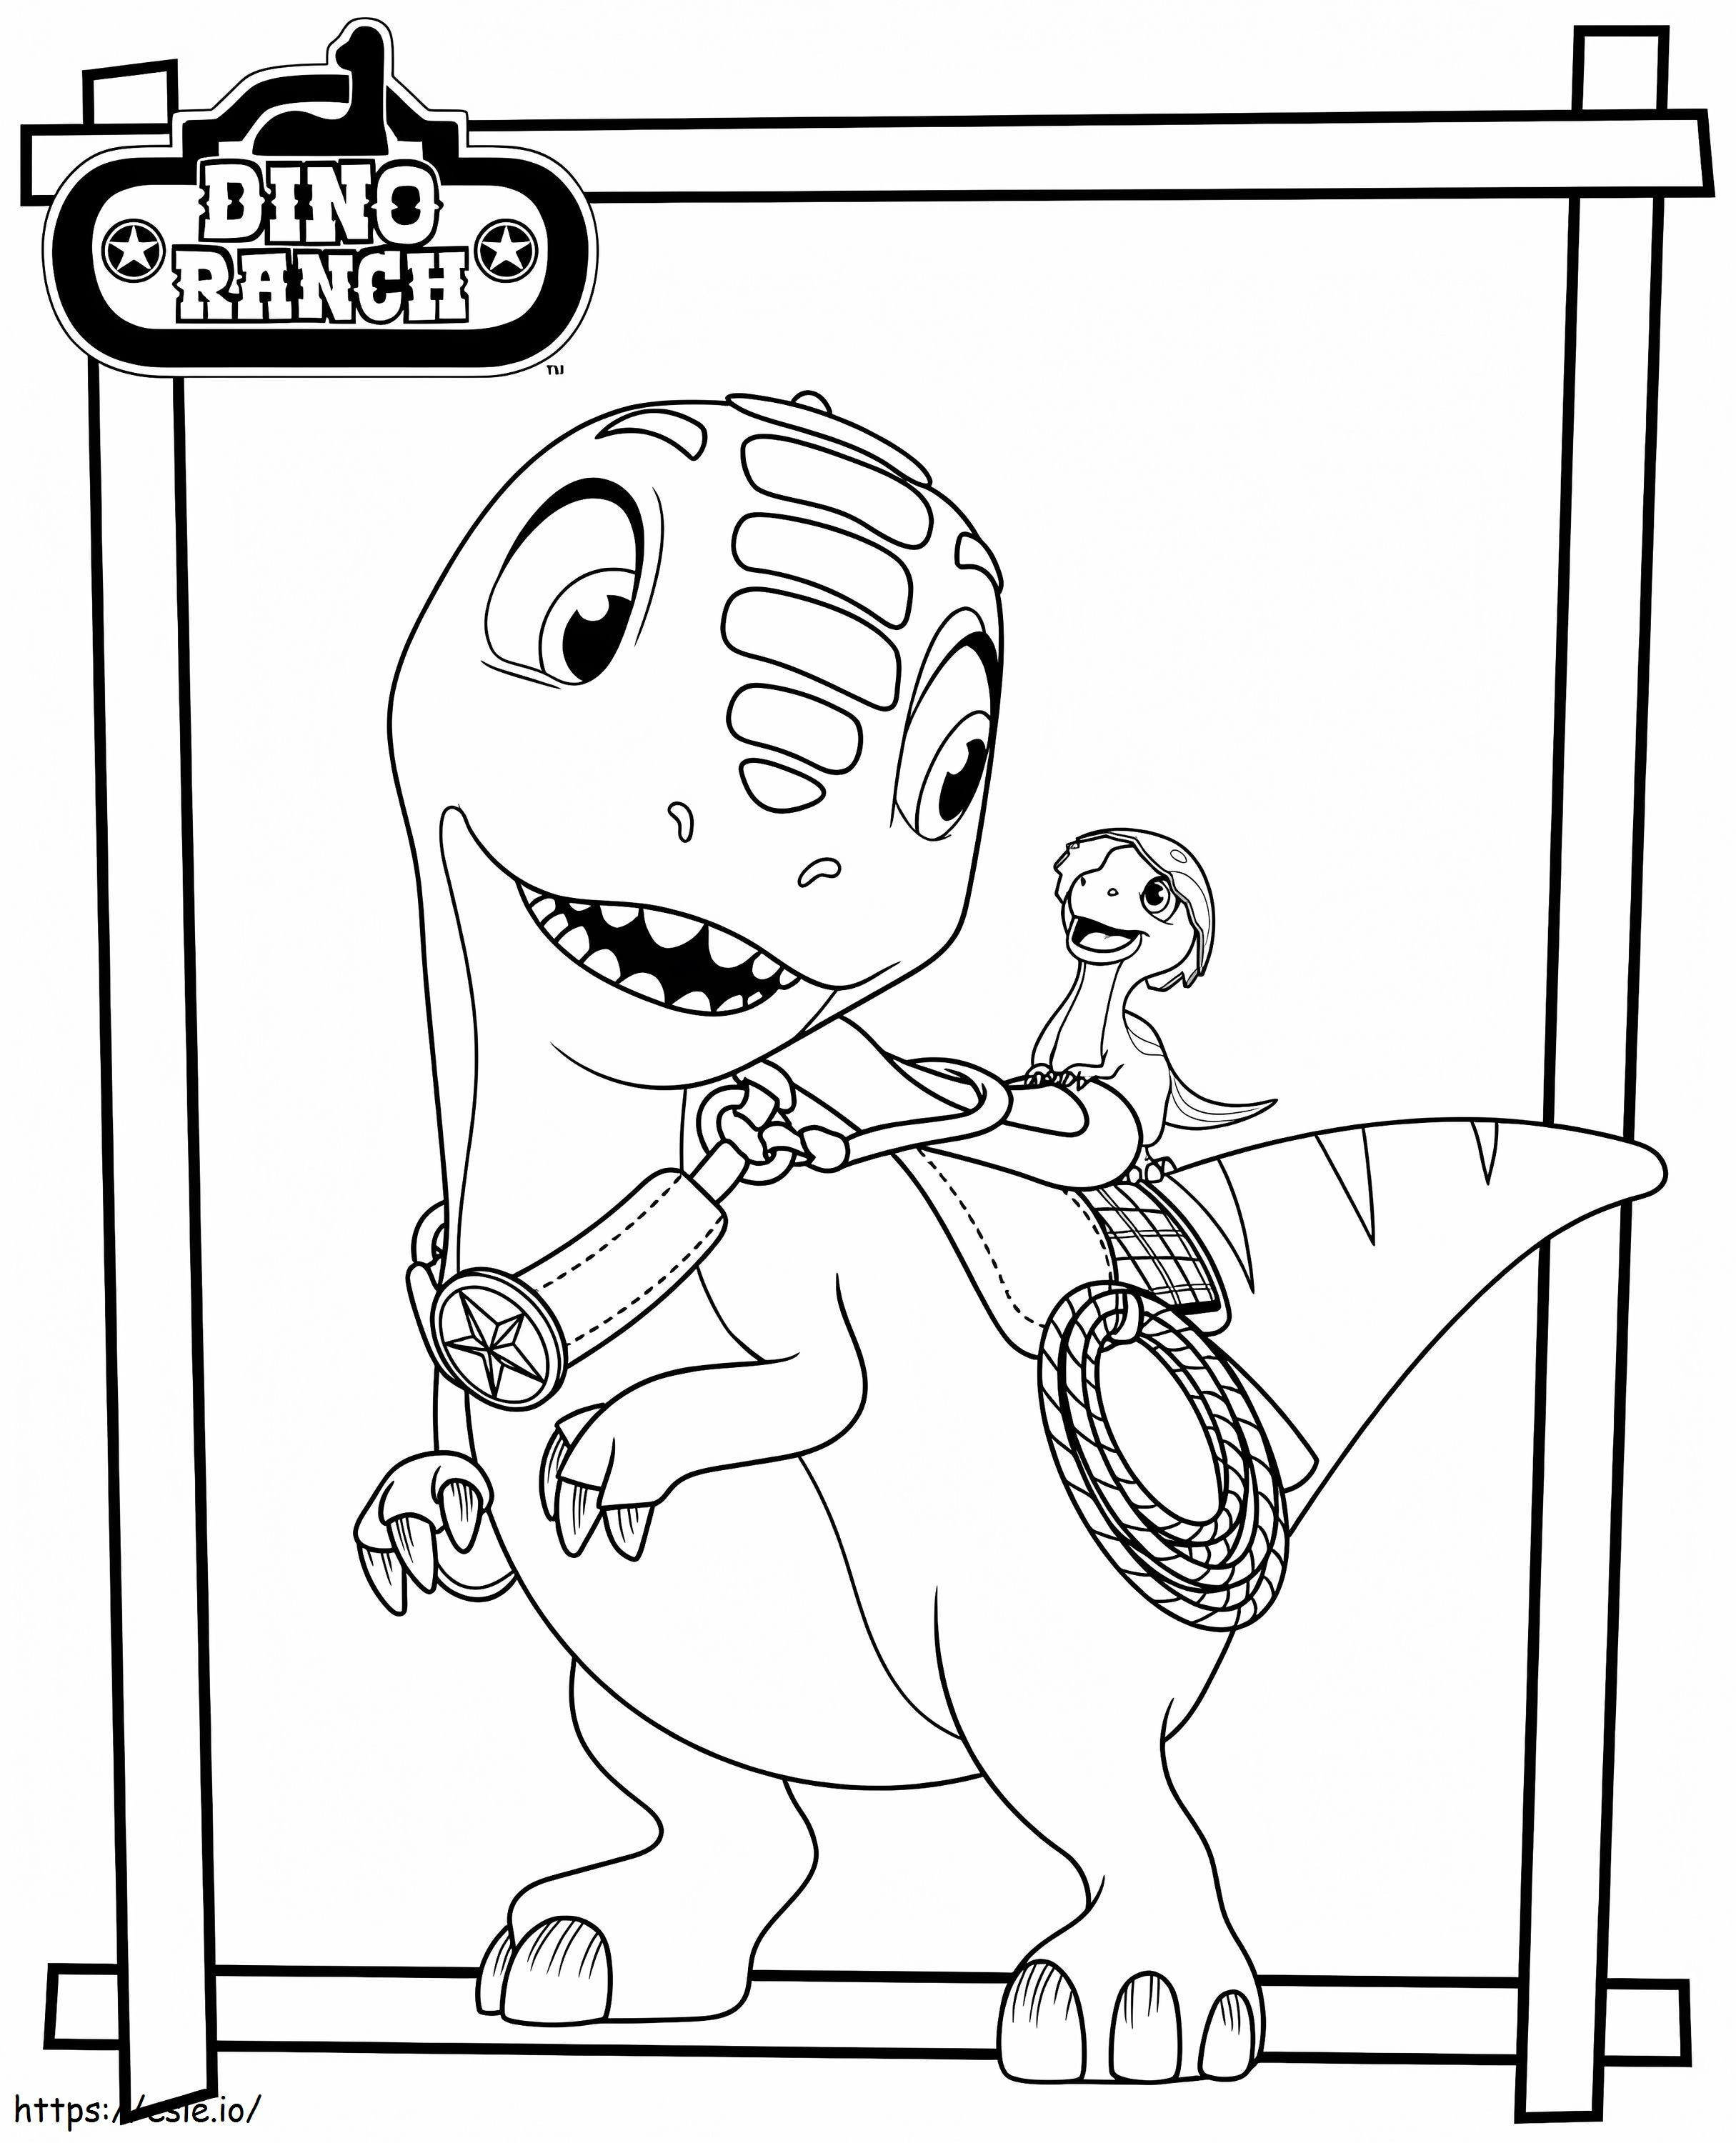 Blitz From Dino Ranch coloring page